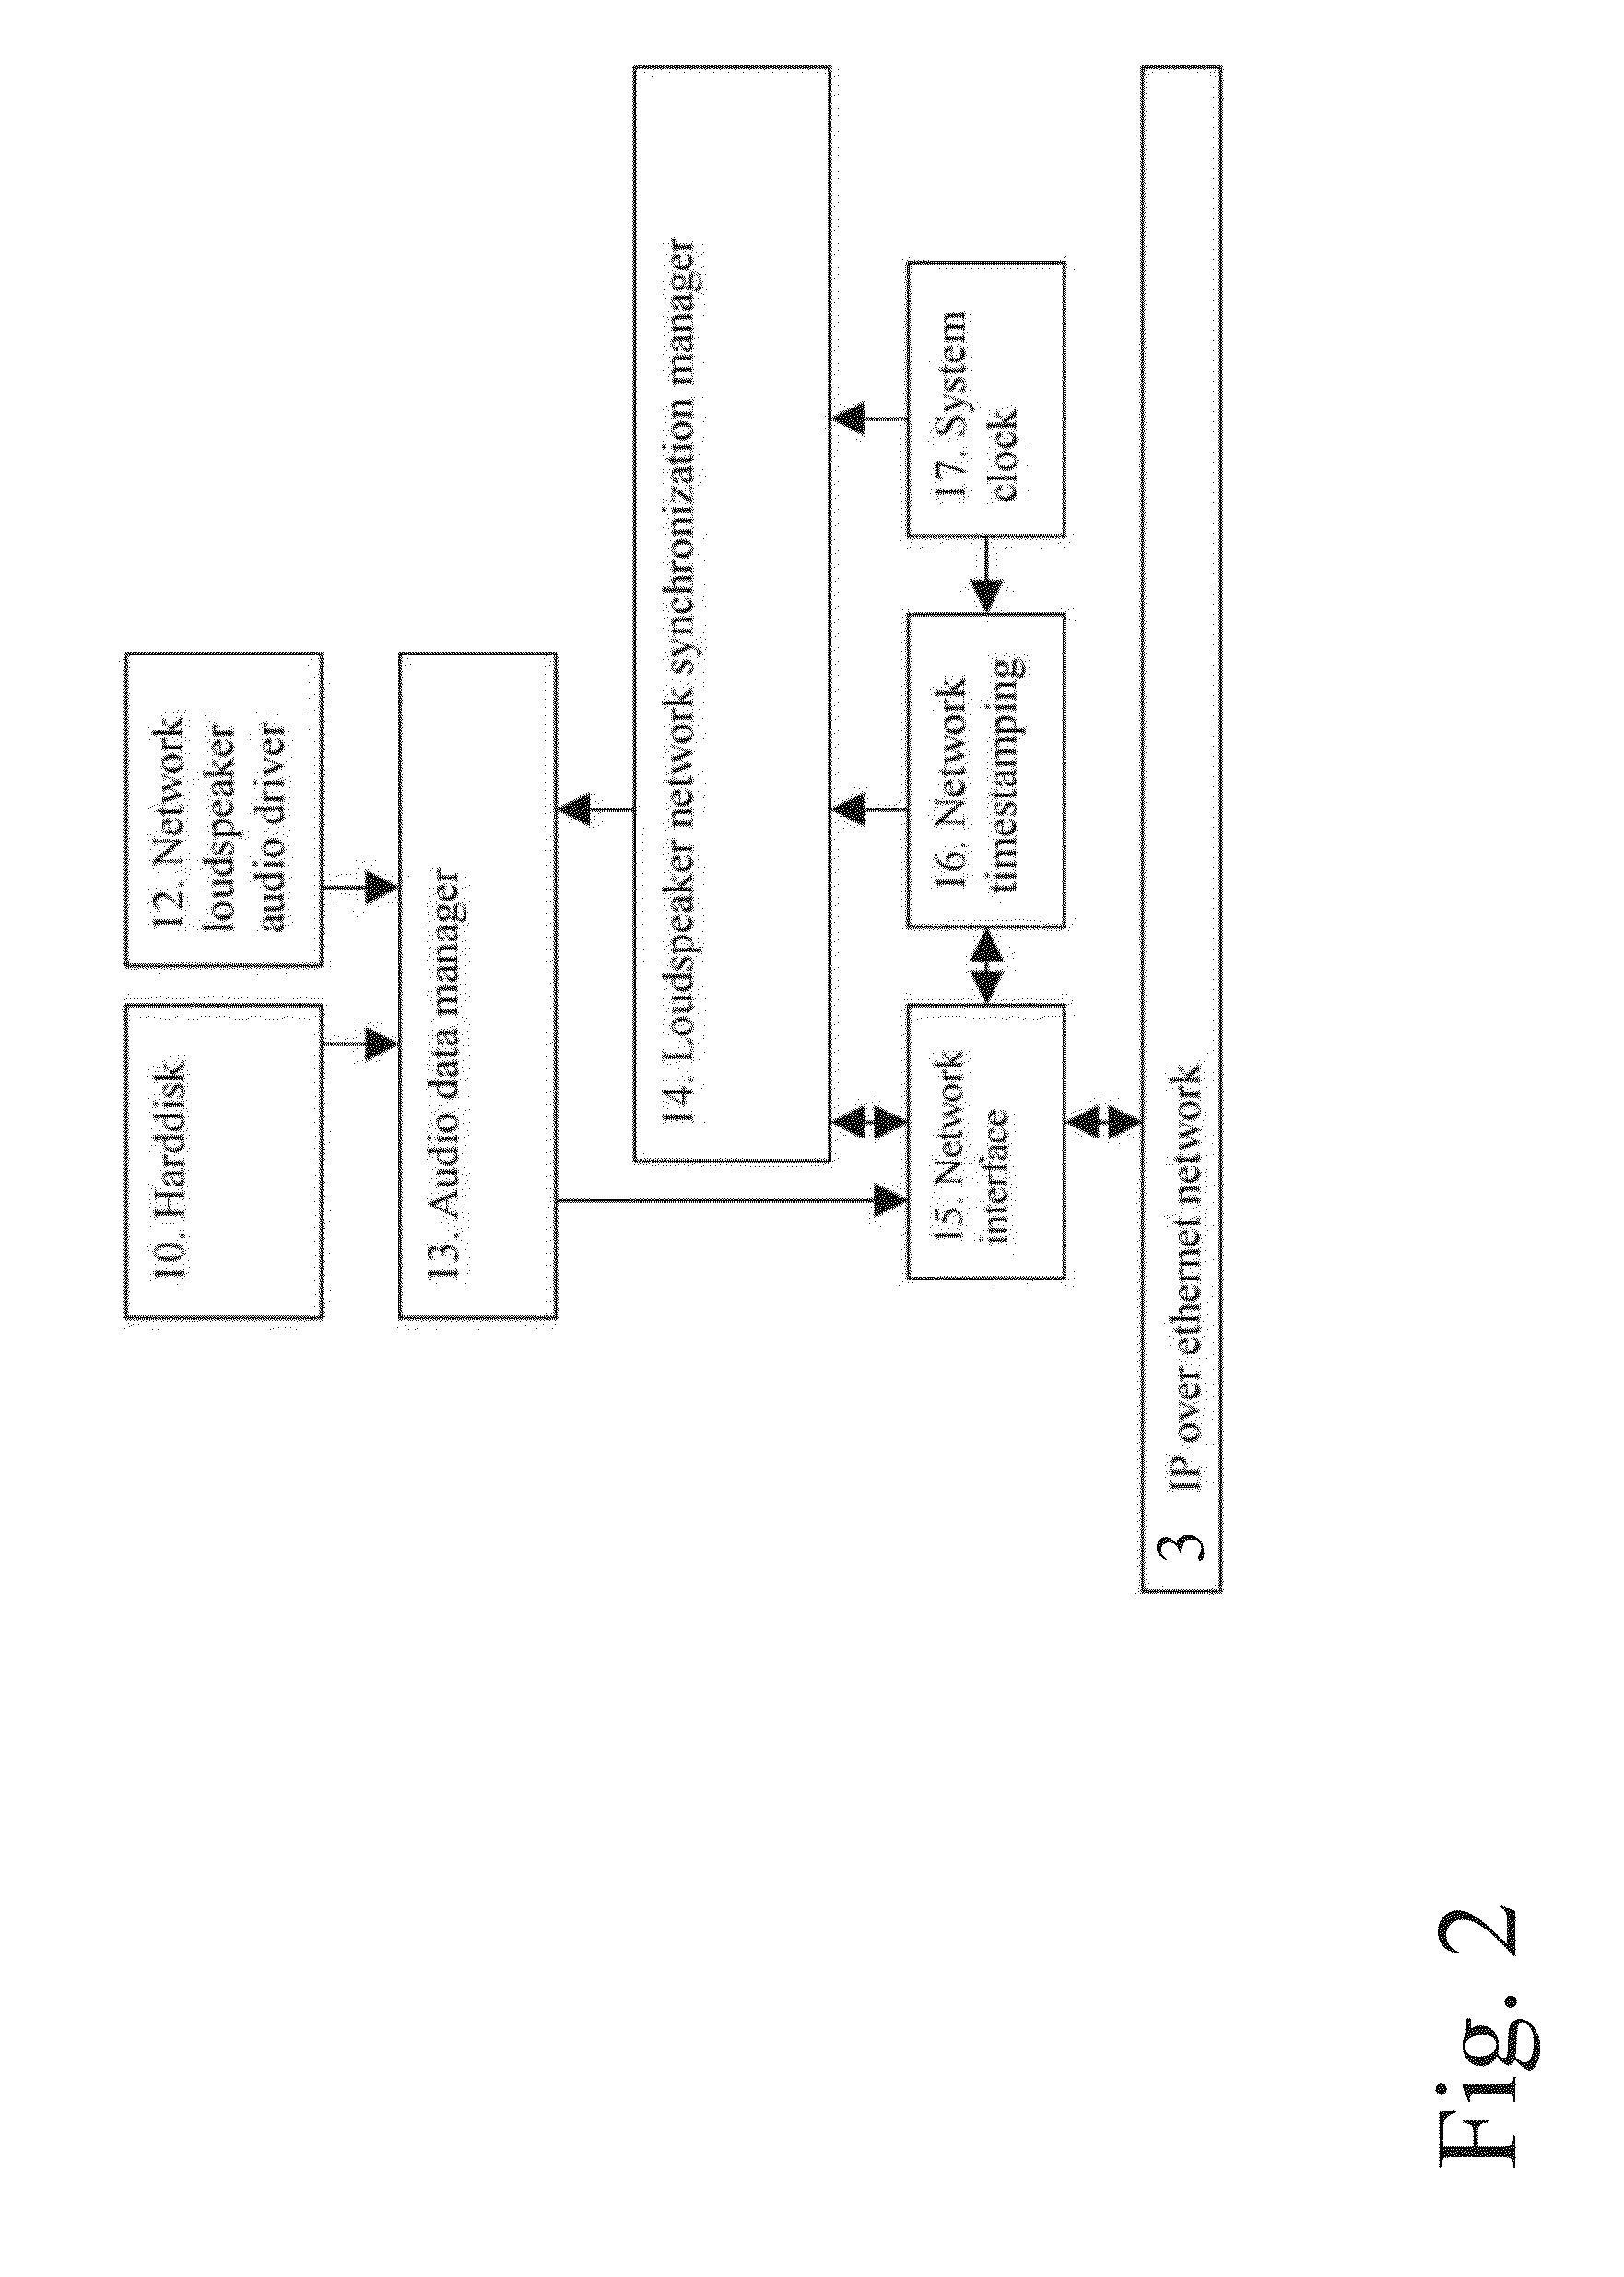 Data transfer method and system for loudspeakers in a digital sound reproduction system